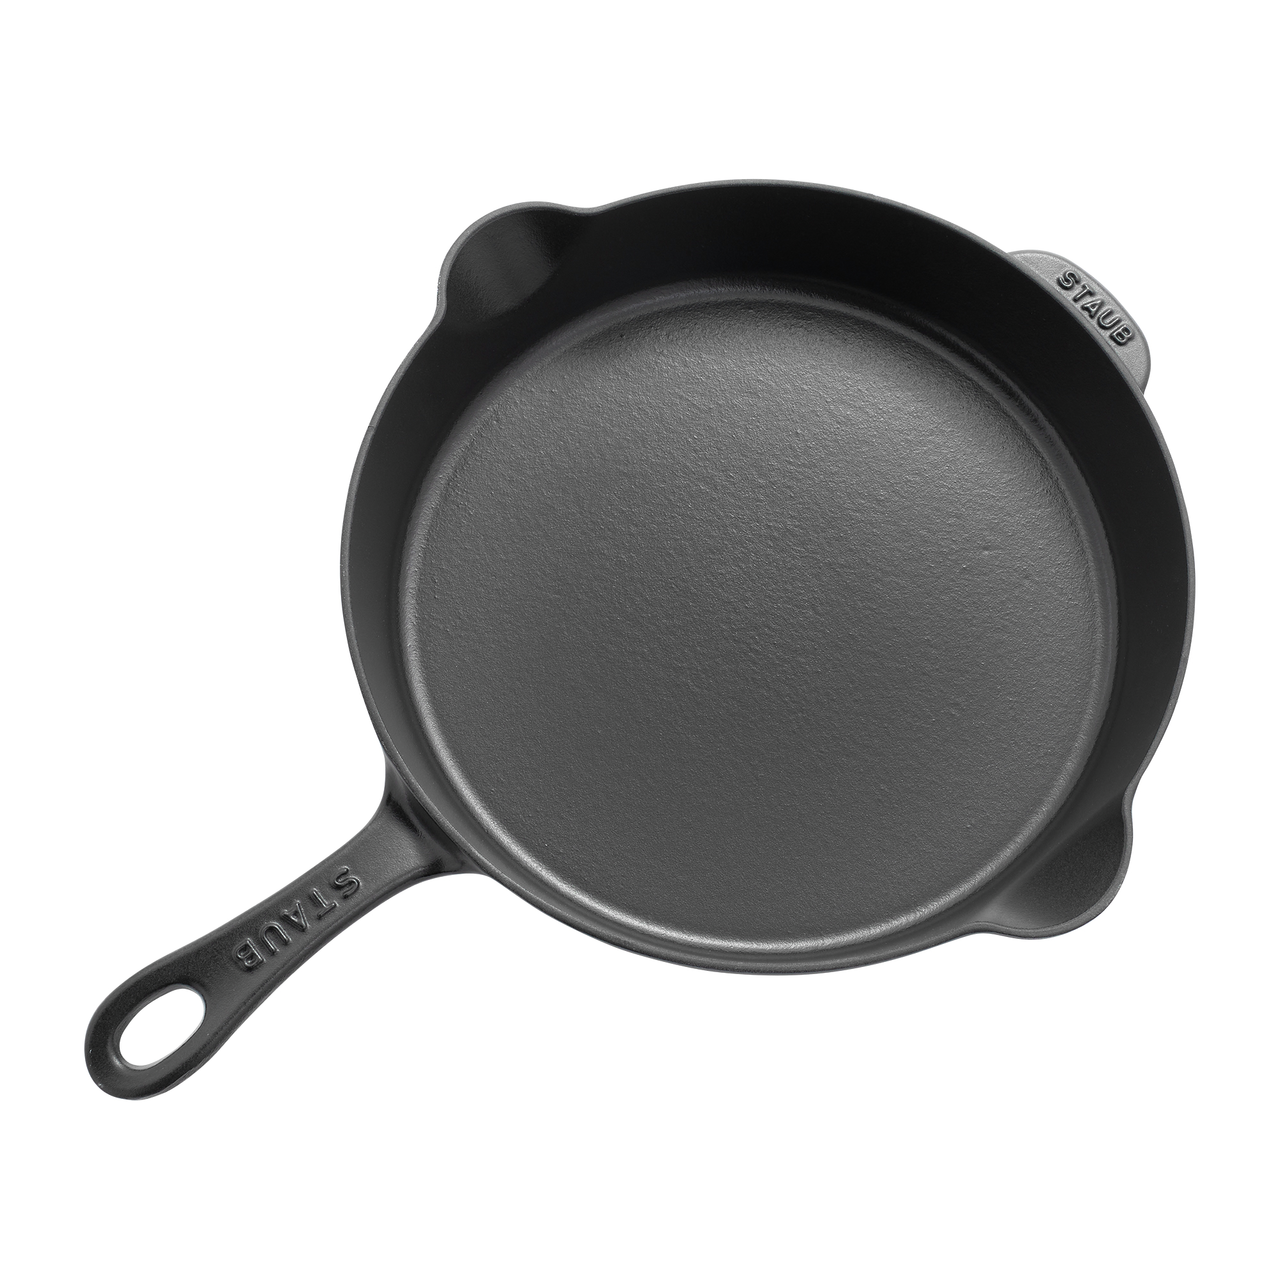 https://www.zwilling.com/on/demandware.static/-/Sites-zwilling-us-Library/default/dwdbd1521a/images/product-content/product-specific-images/staub-pdp-hotspot-modules/staub-traditional-skillet-black.png